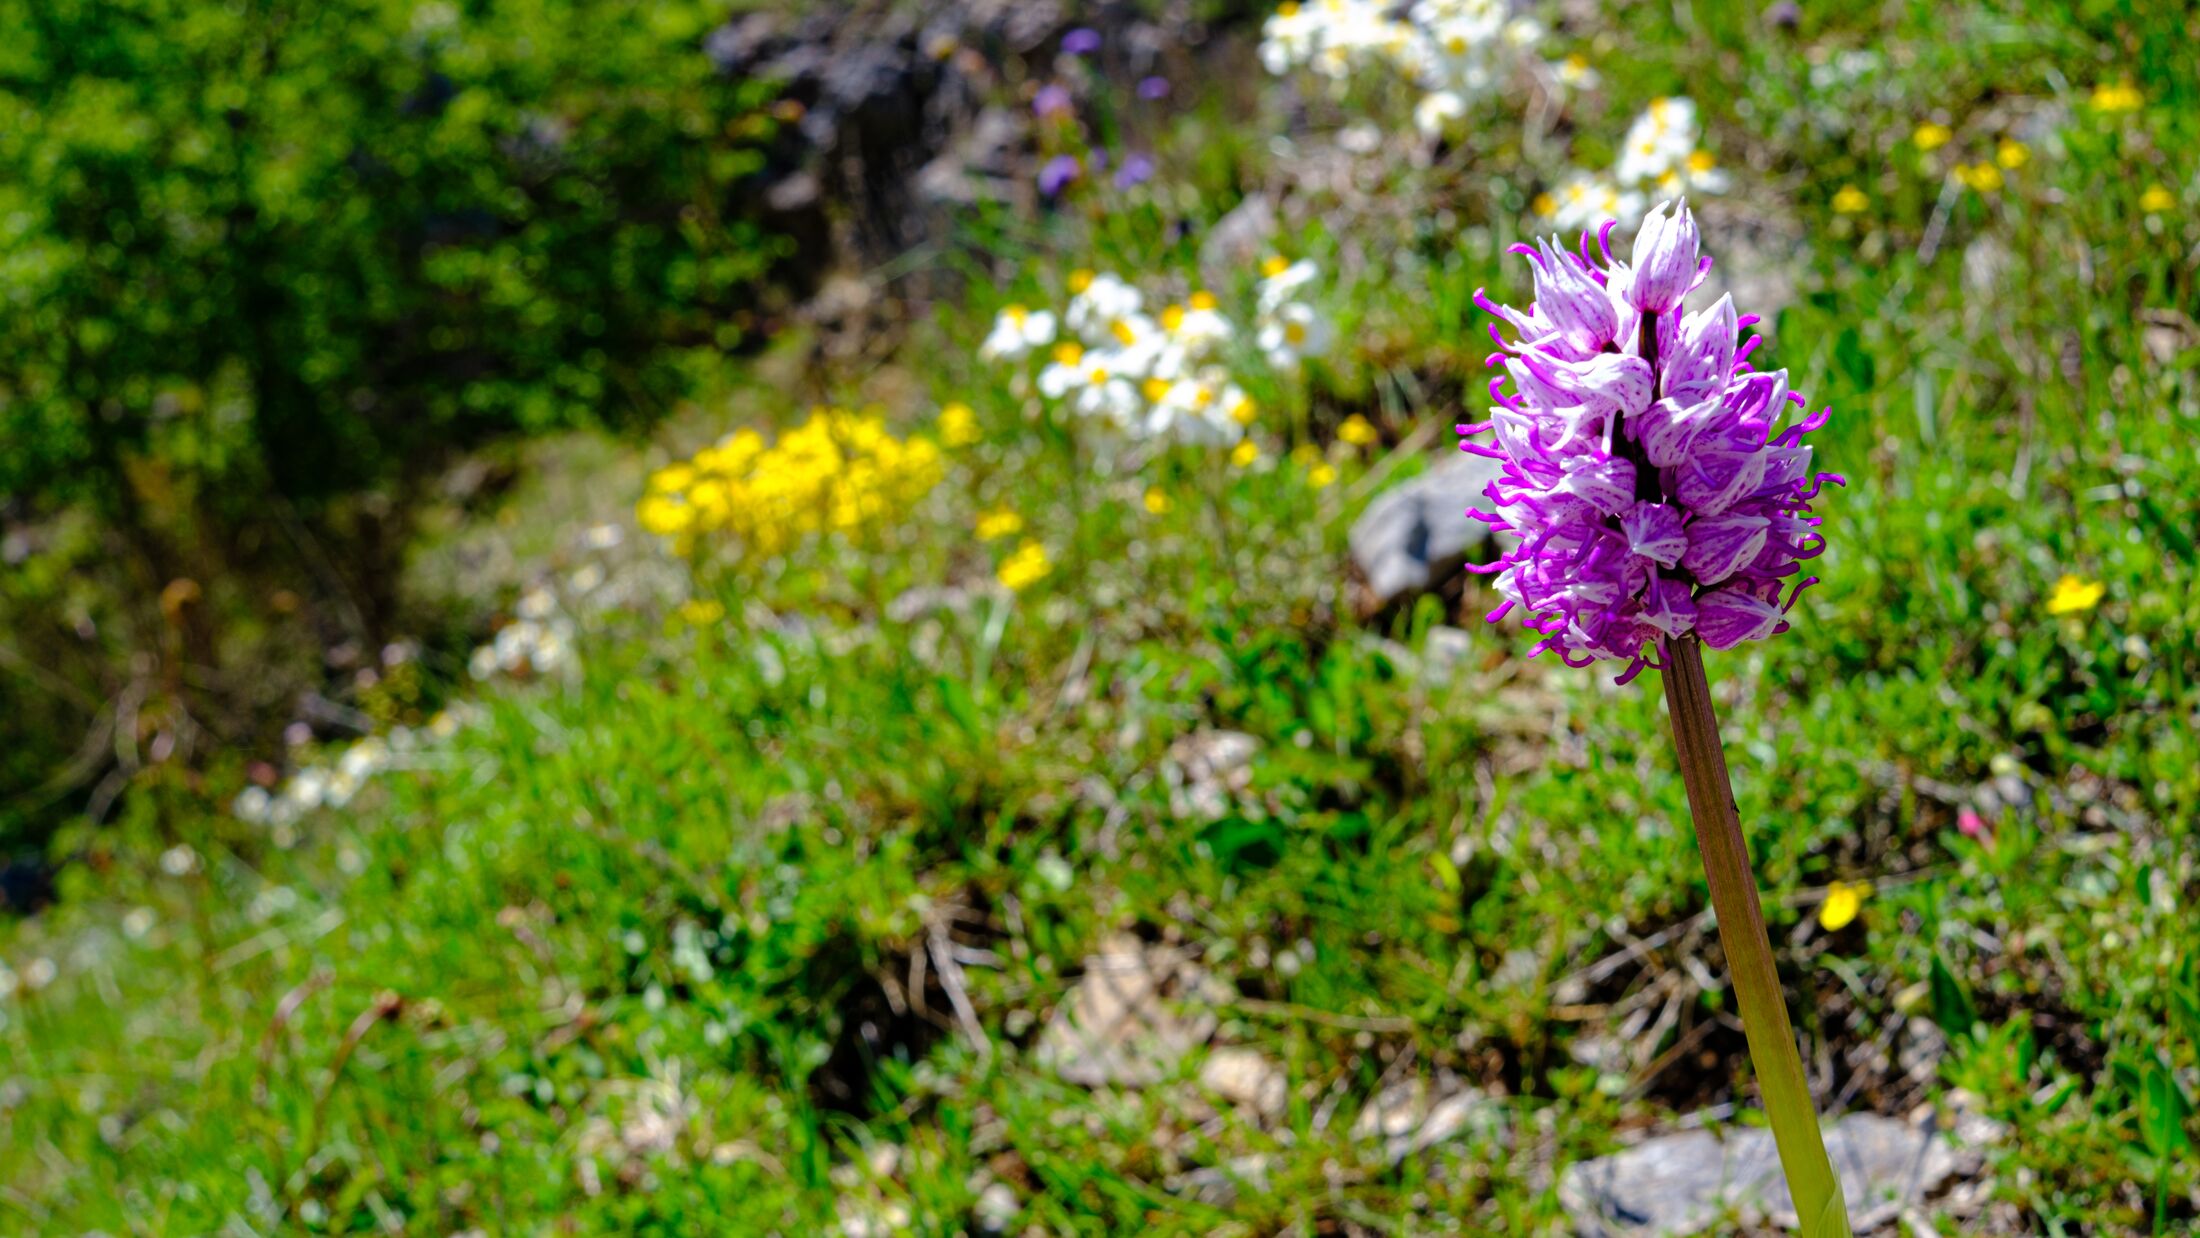 Wild orchid, white and fuchsia. Valley of the orchids, Campania, Italy